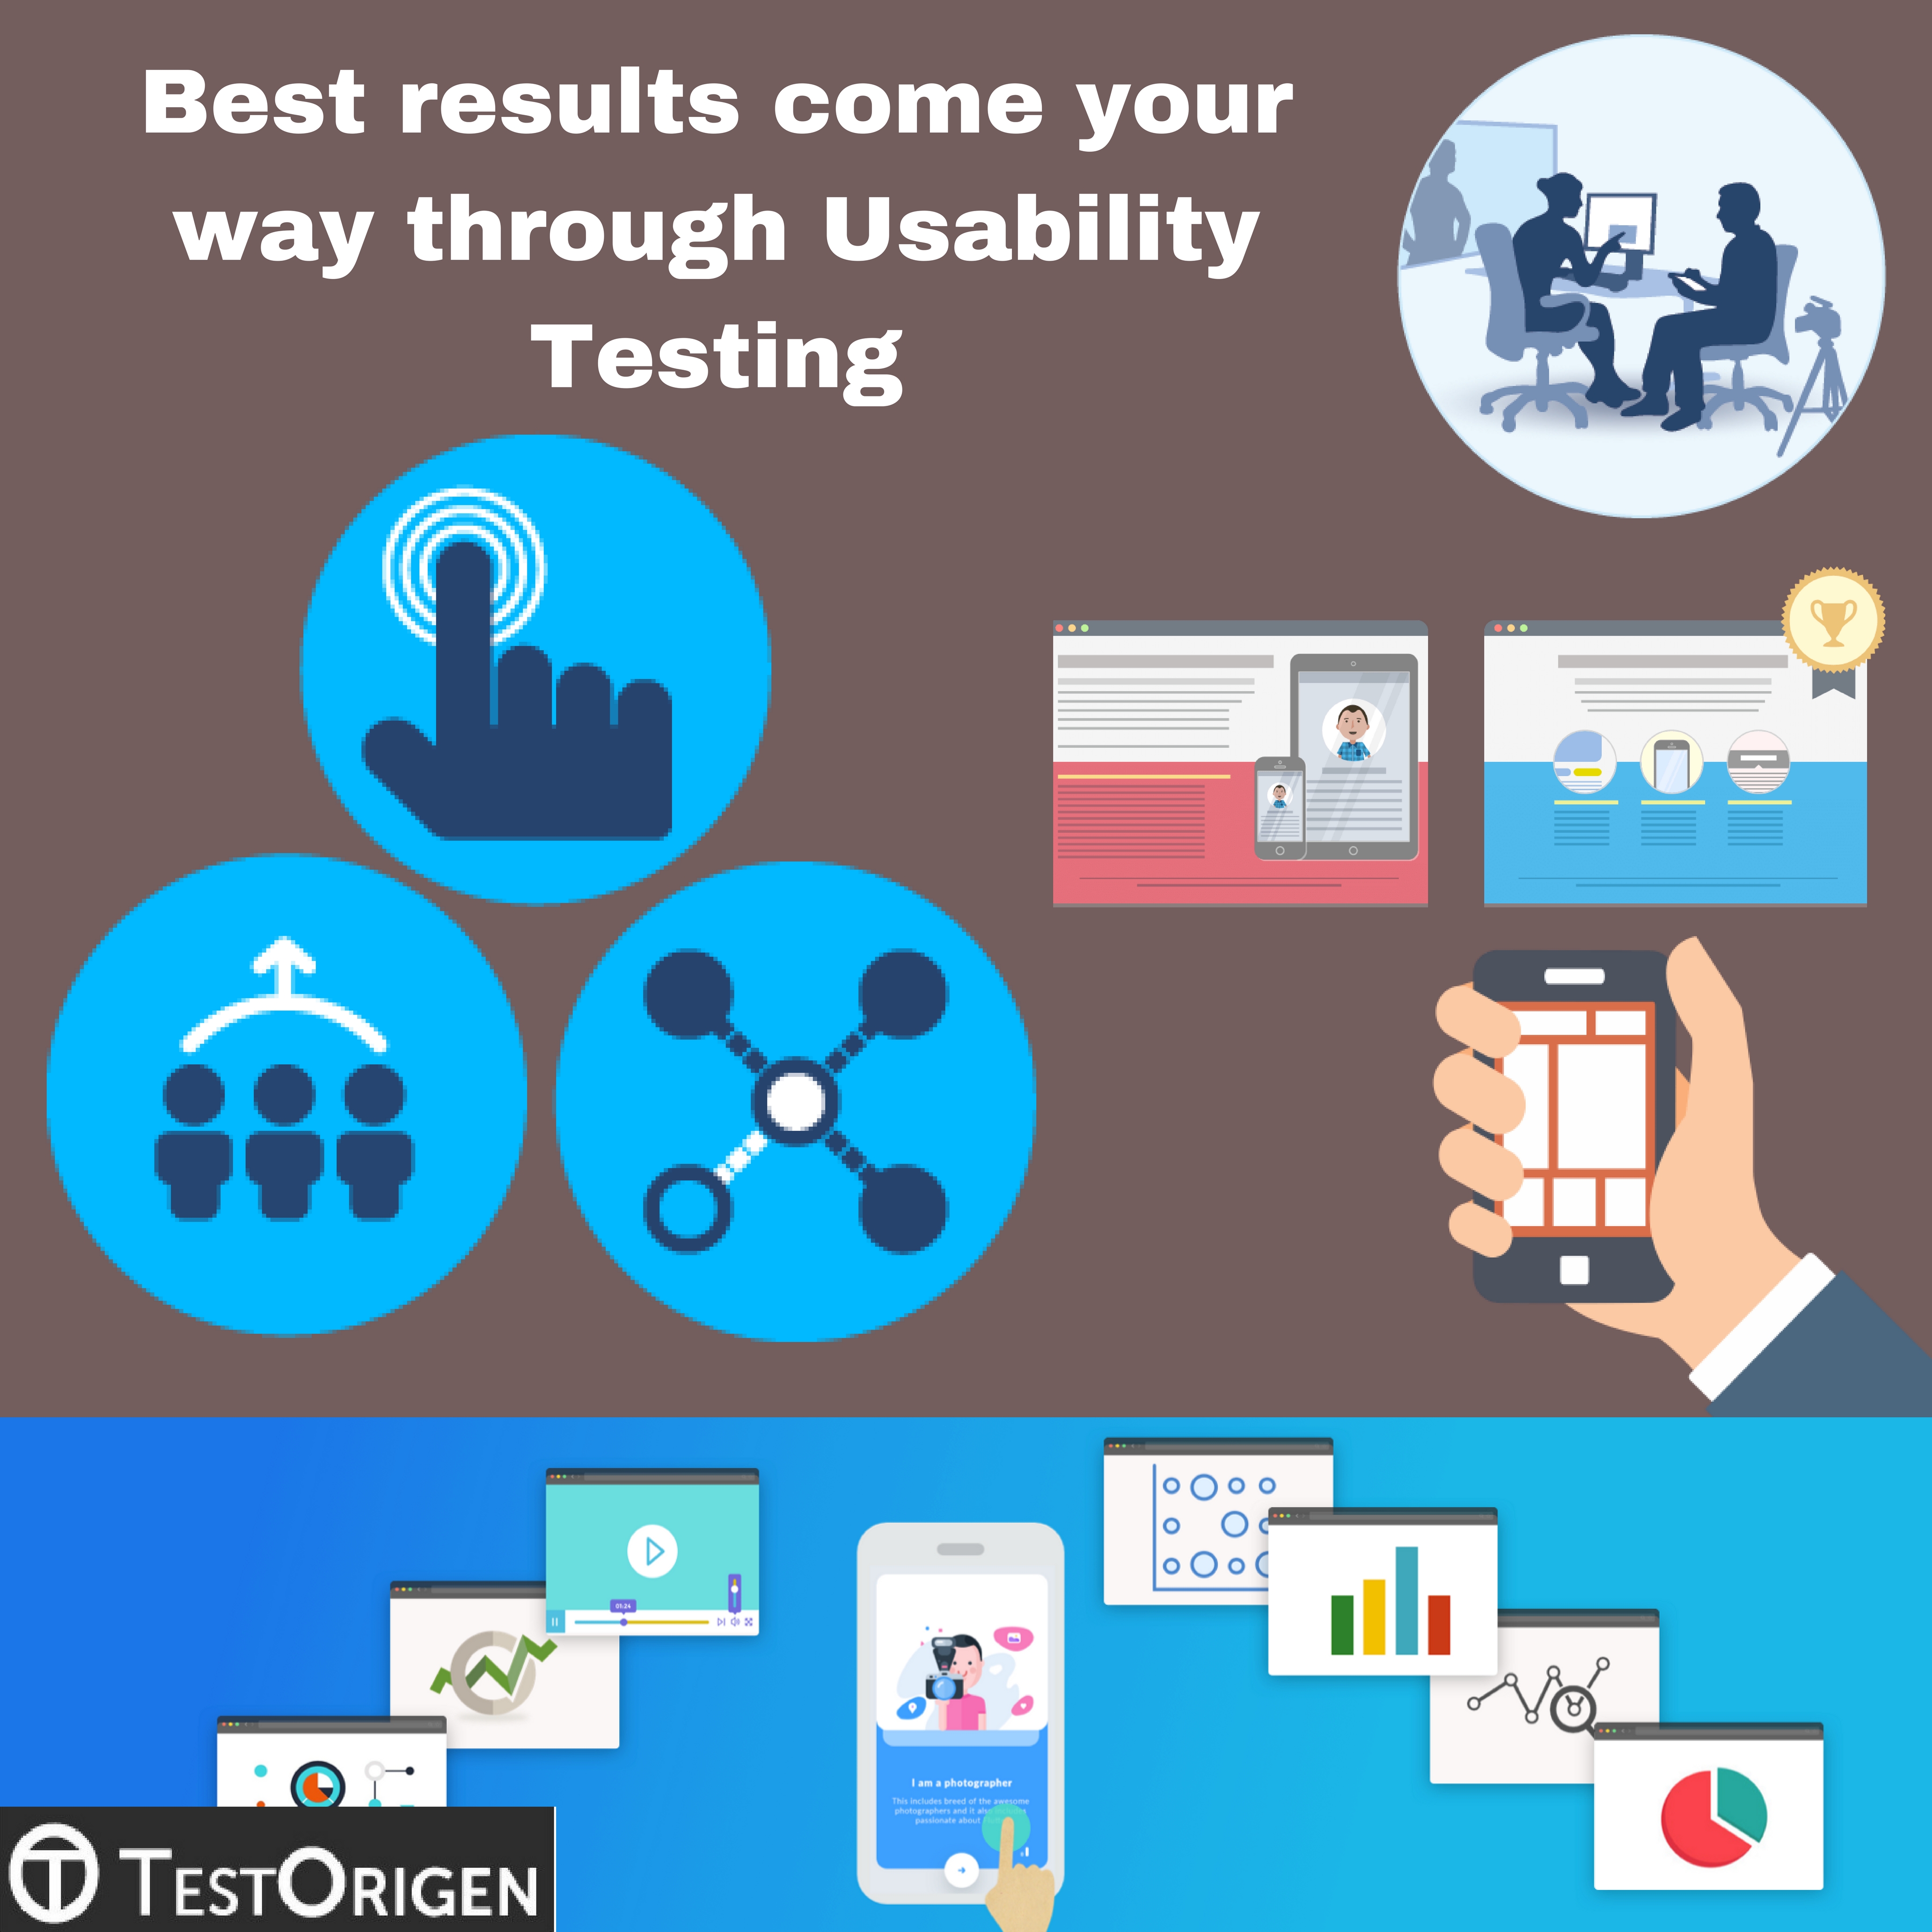 Best results come your way through Usability Testing